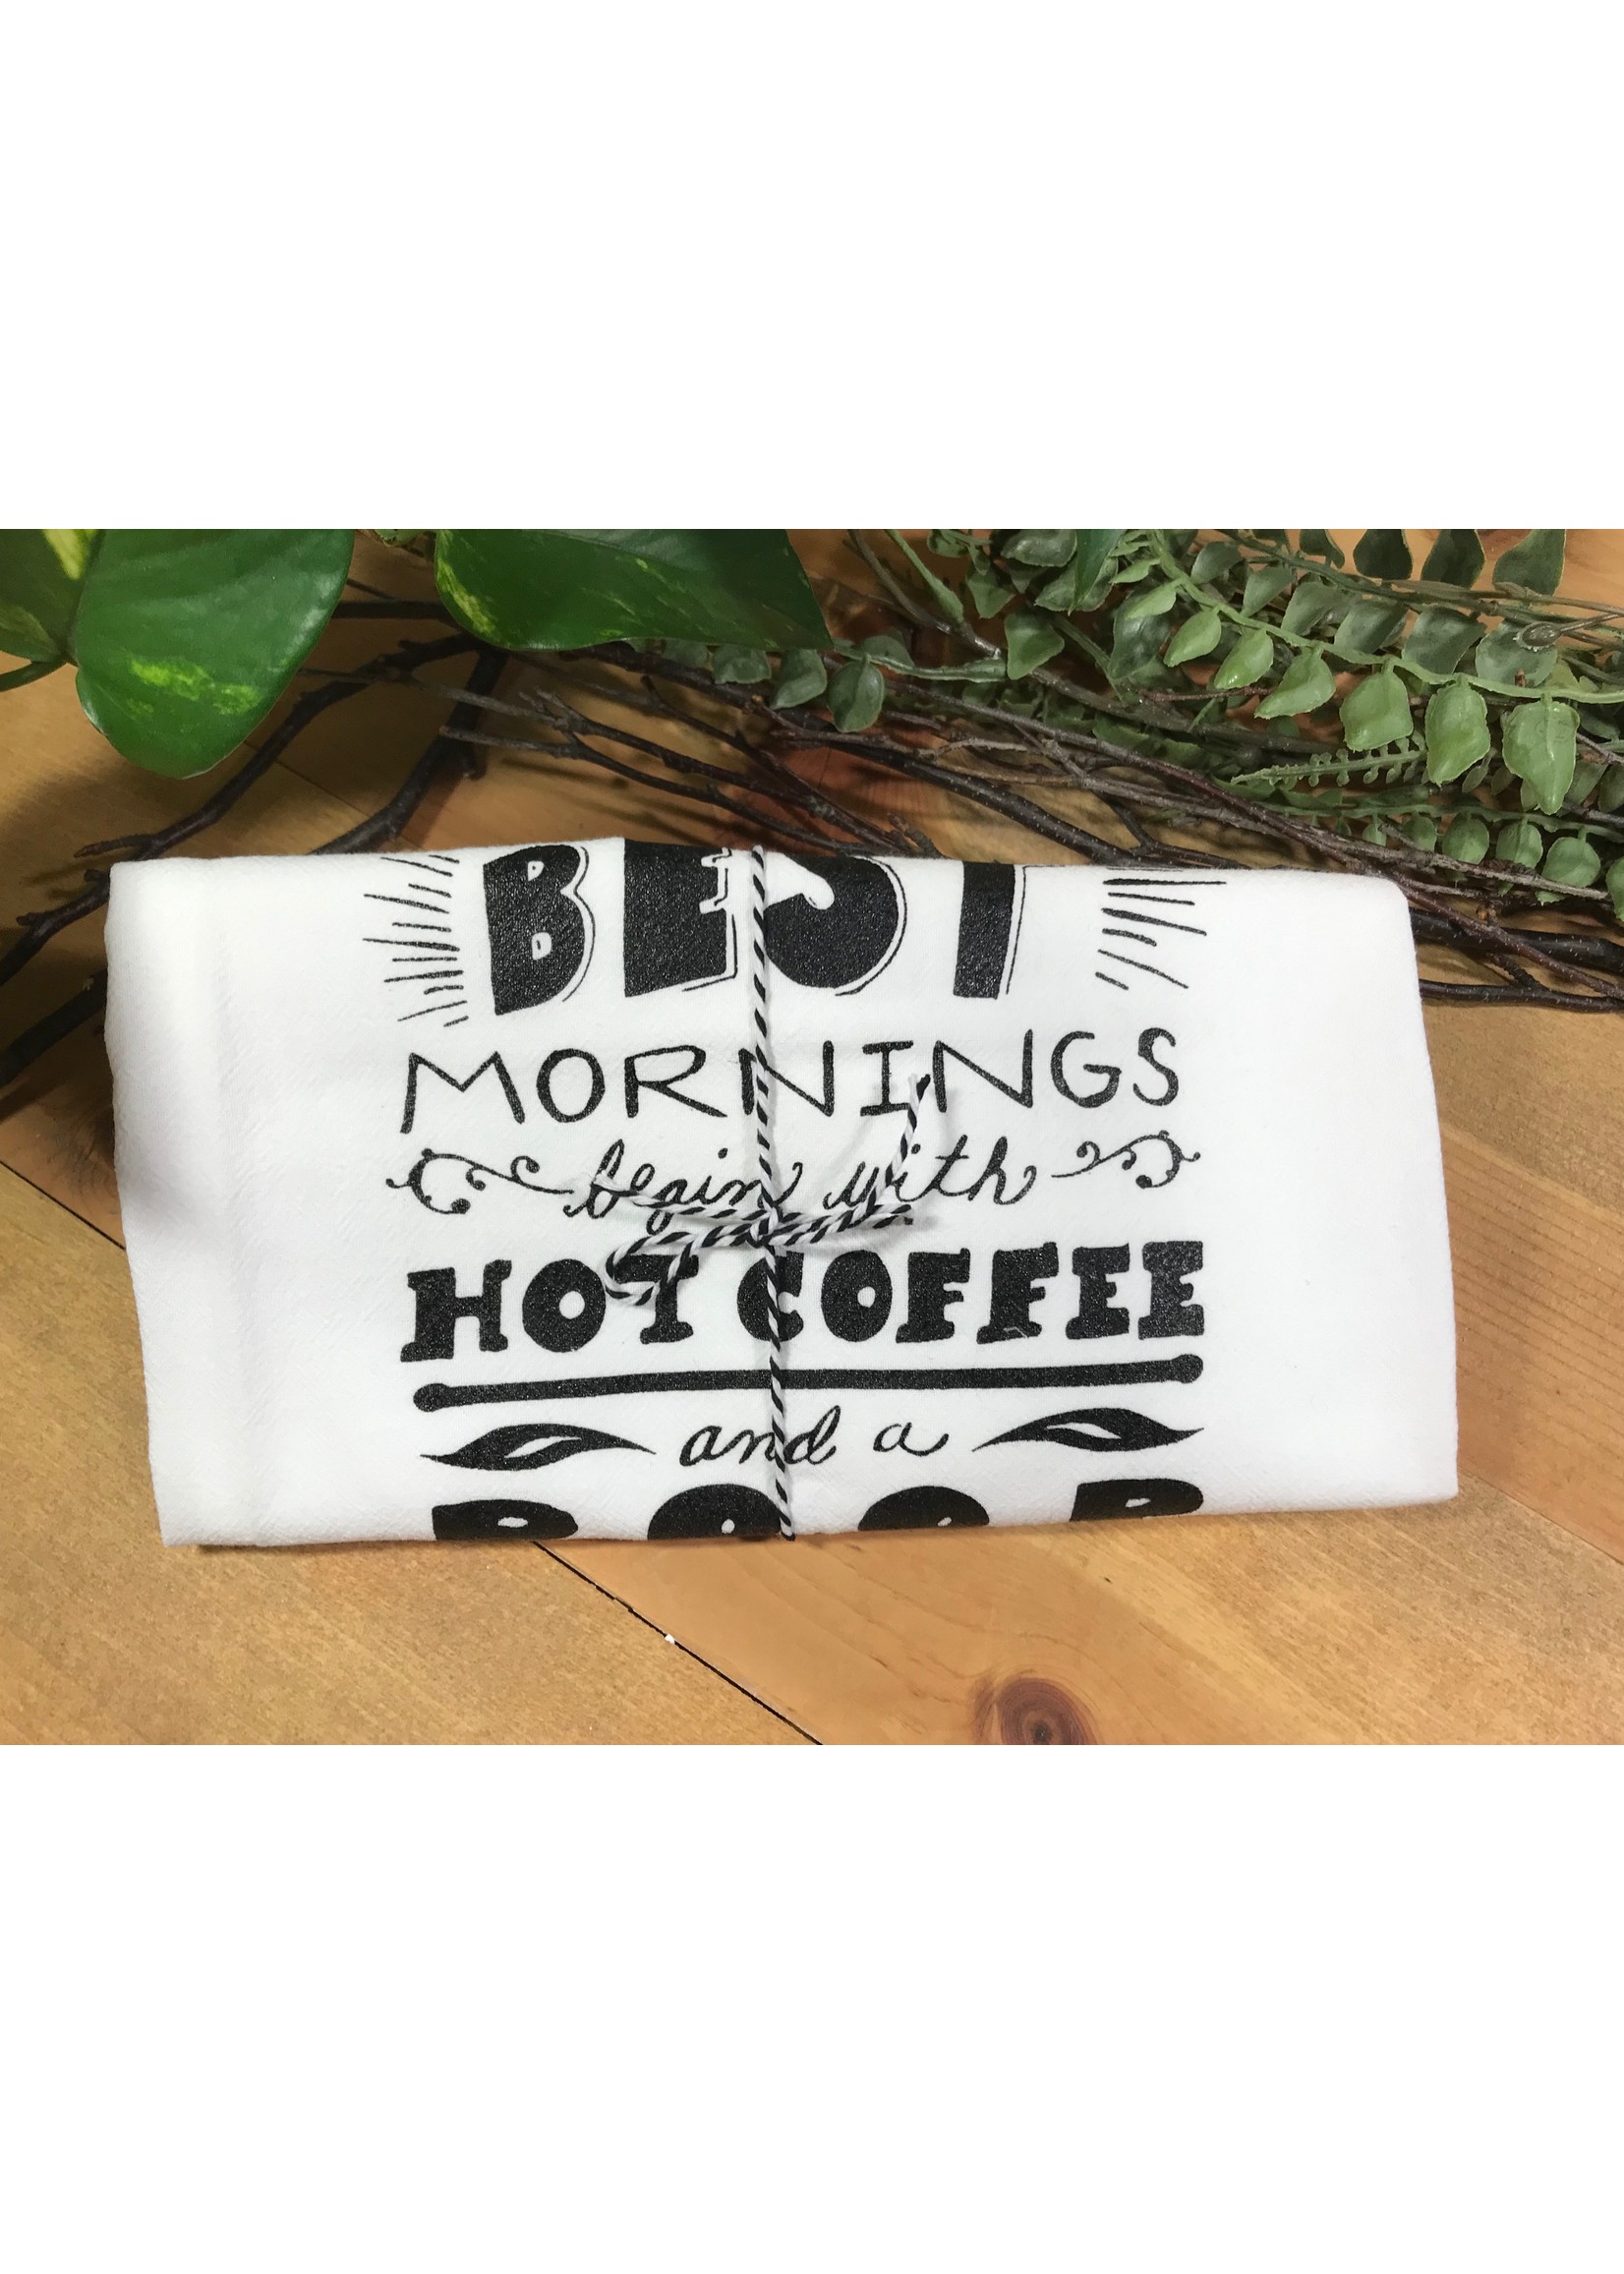 Screen Printed Dish Towel The Best Mornings Begin with a Hot Coffee and a Poop